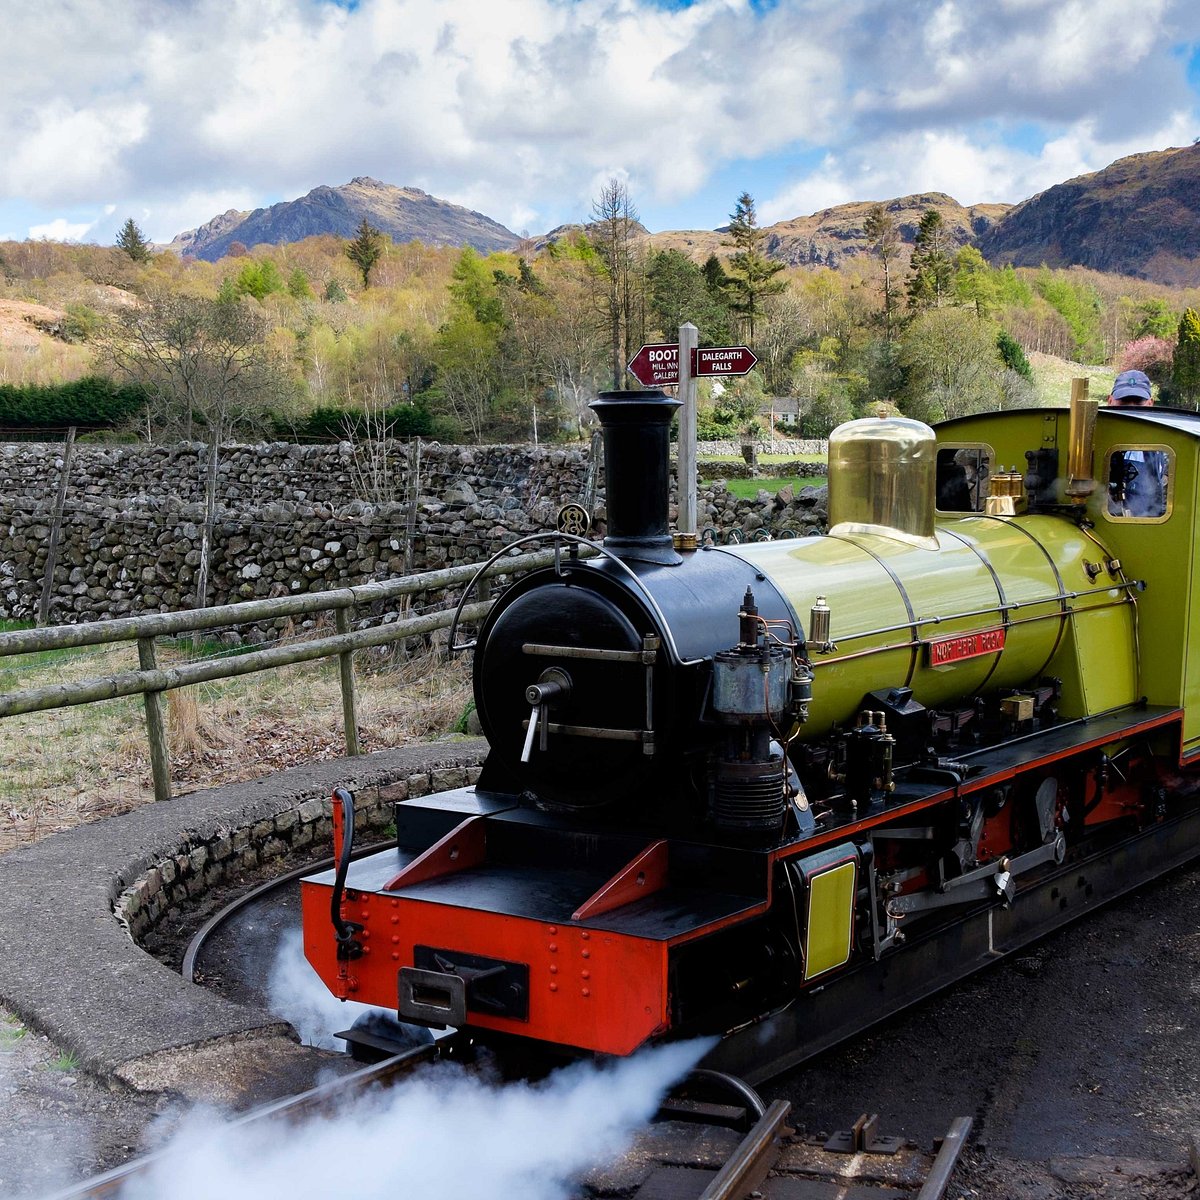 Steam and sparkle: 6 of the best Christmas railway journeys in the